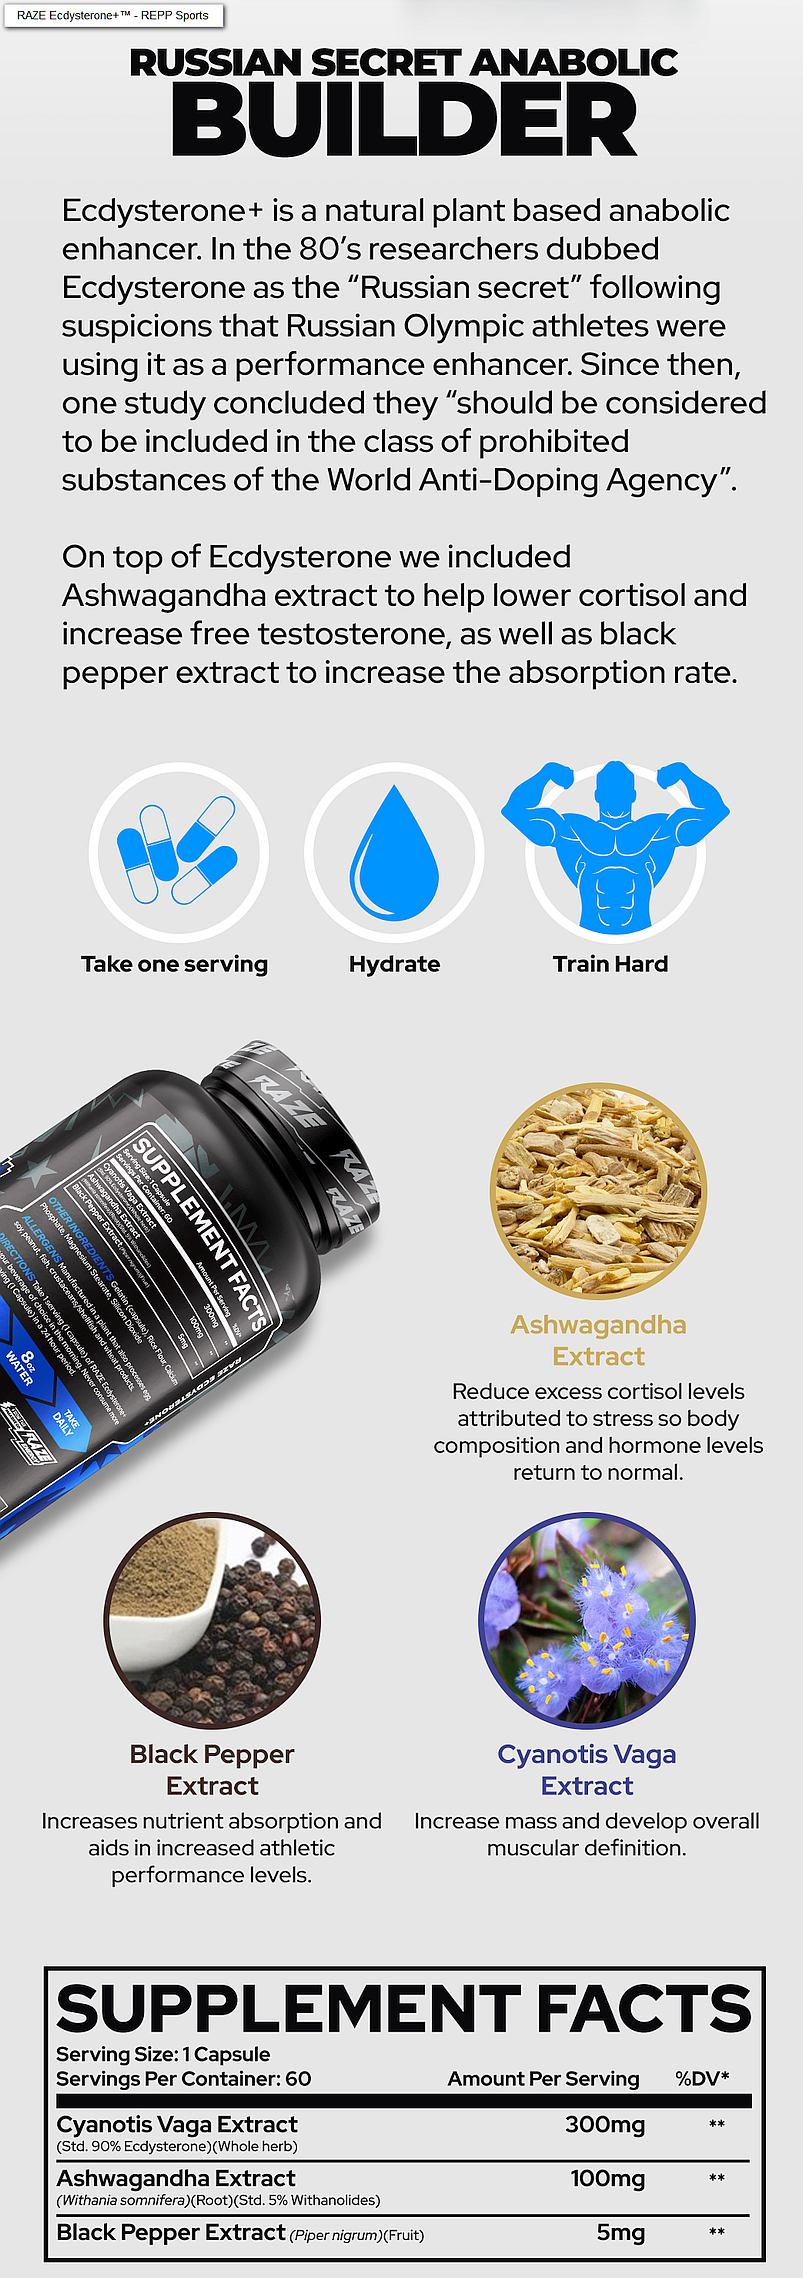 Image displaying information about a product named RAZE Ecdysterone+. It's a plant-based anabolic enhancer used for performance enhancement. It contains Ashwagandha and black pepper extracts.